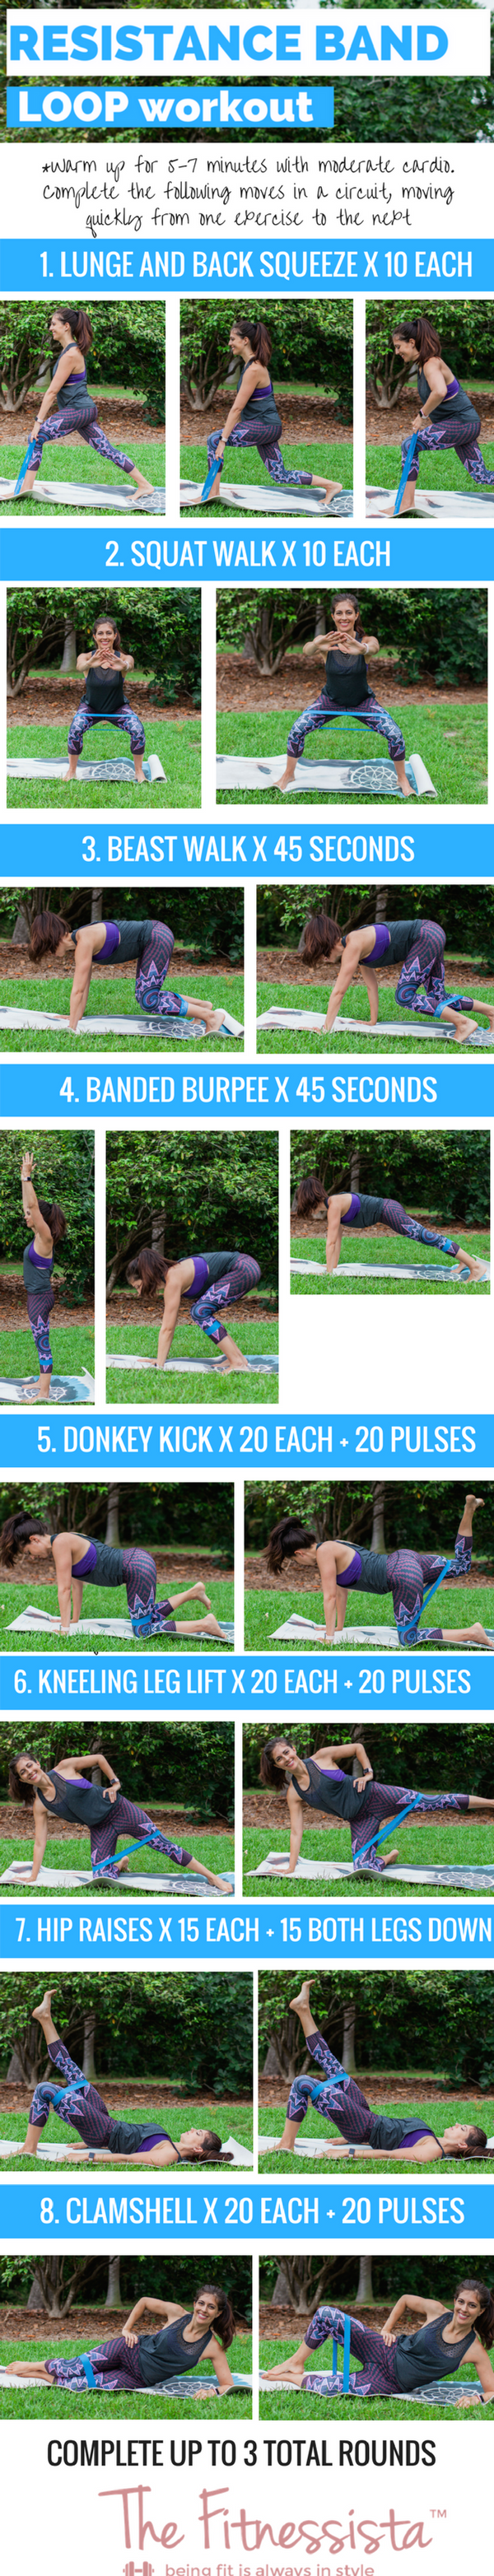 10 Loop Band Exercises for a Full-body Workout